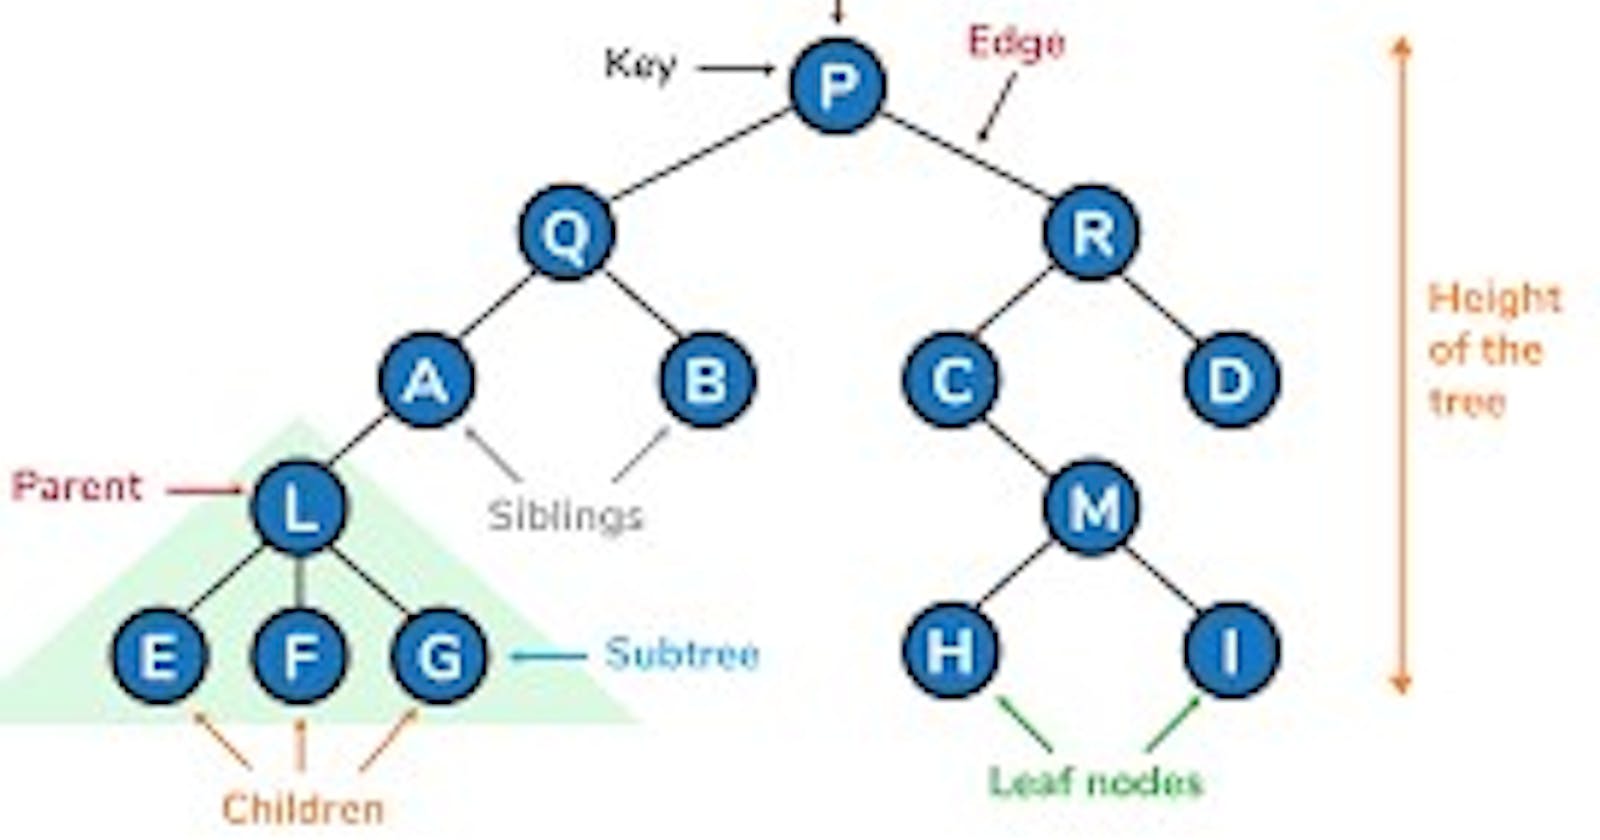 Tree Data Structure